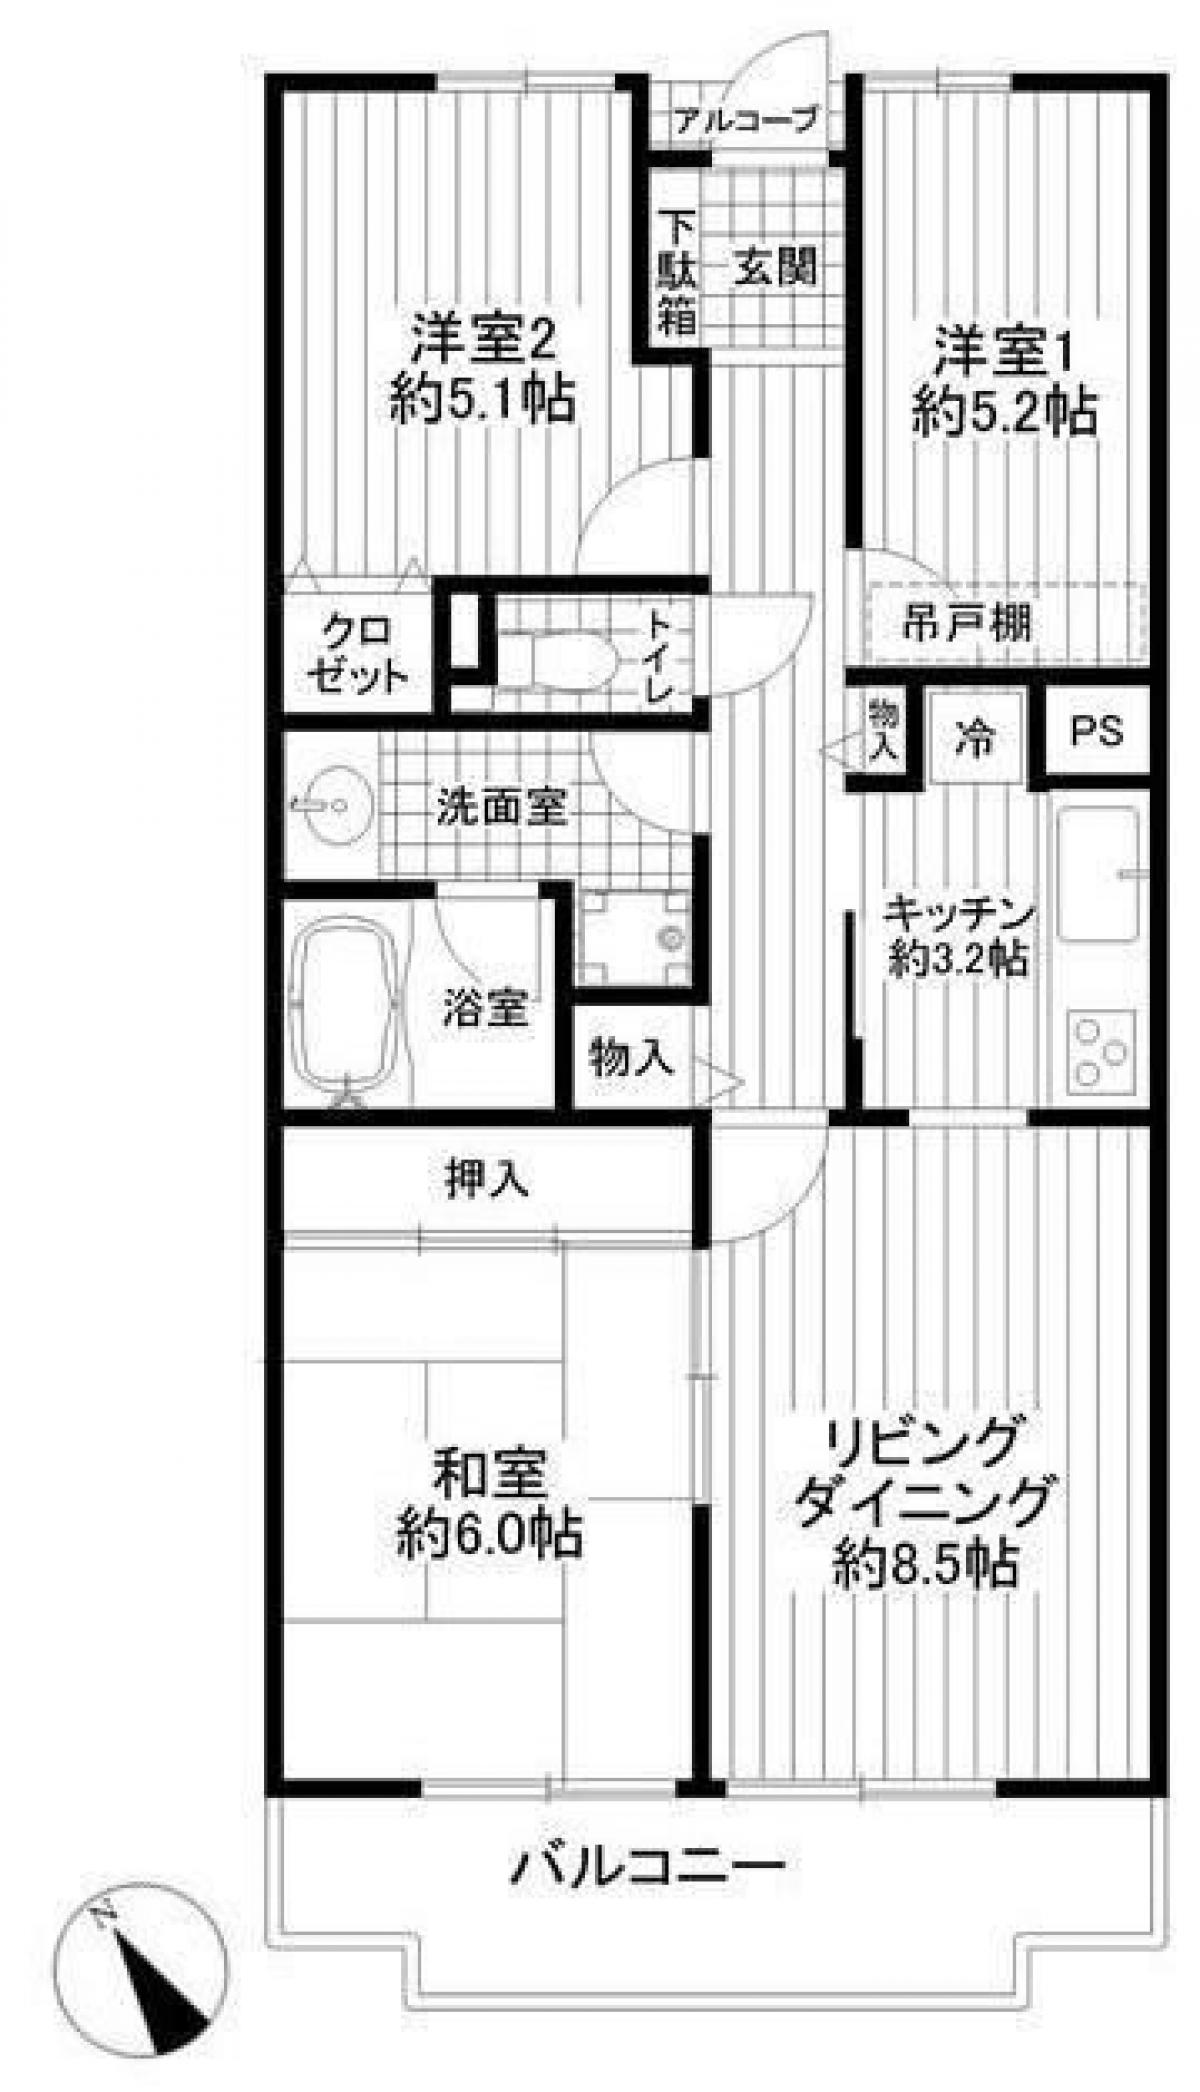 Picture of Apartment For Sale in Matsudo Shi, Chiba, Japan